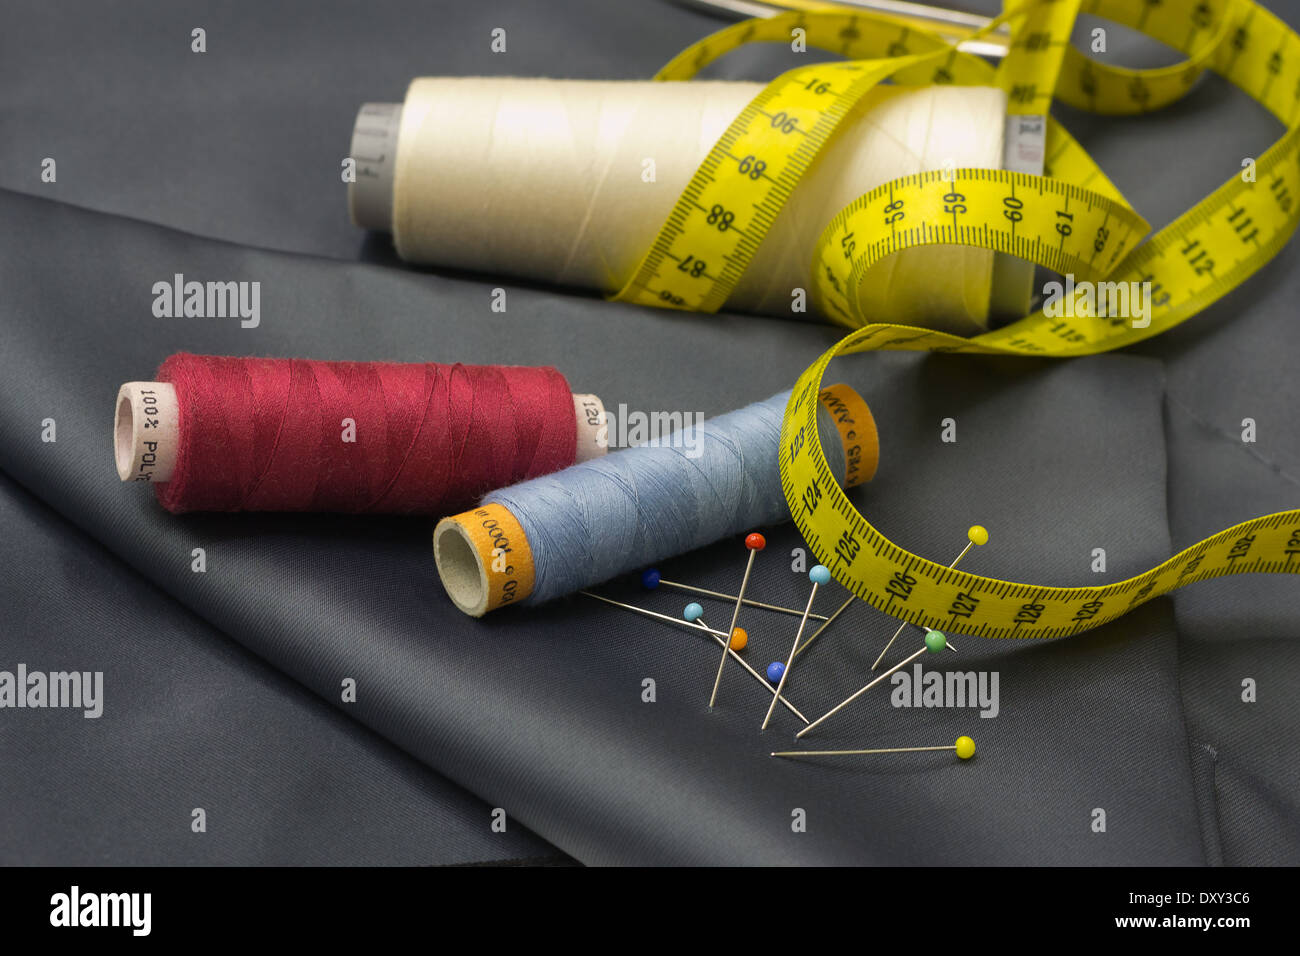 Tailors tools - thread spools, pin and yellow measuring tape on grey fabric. Stock Photo